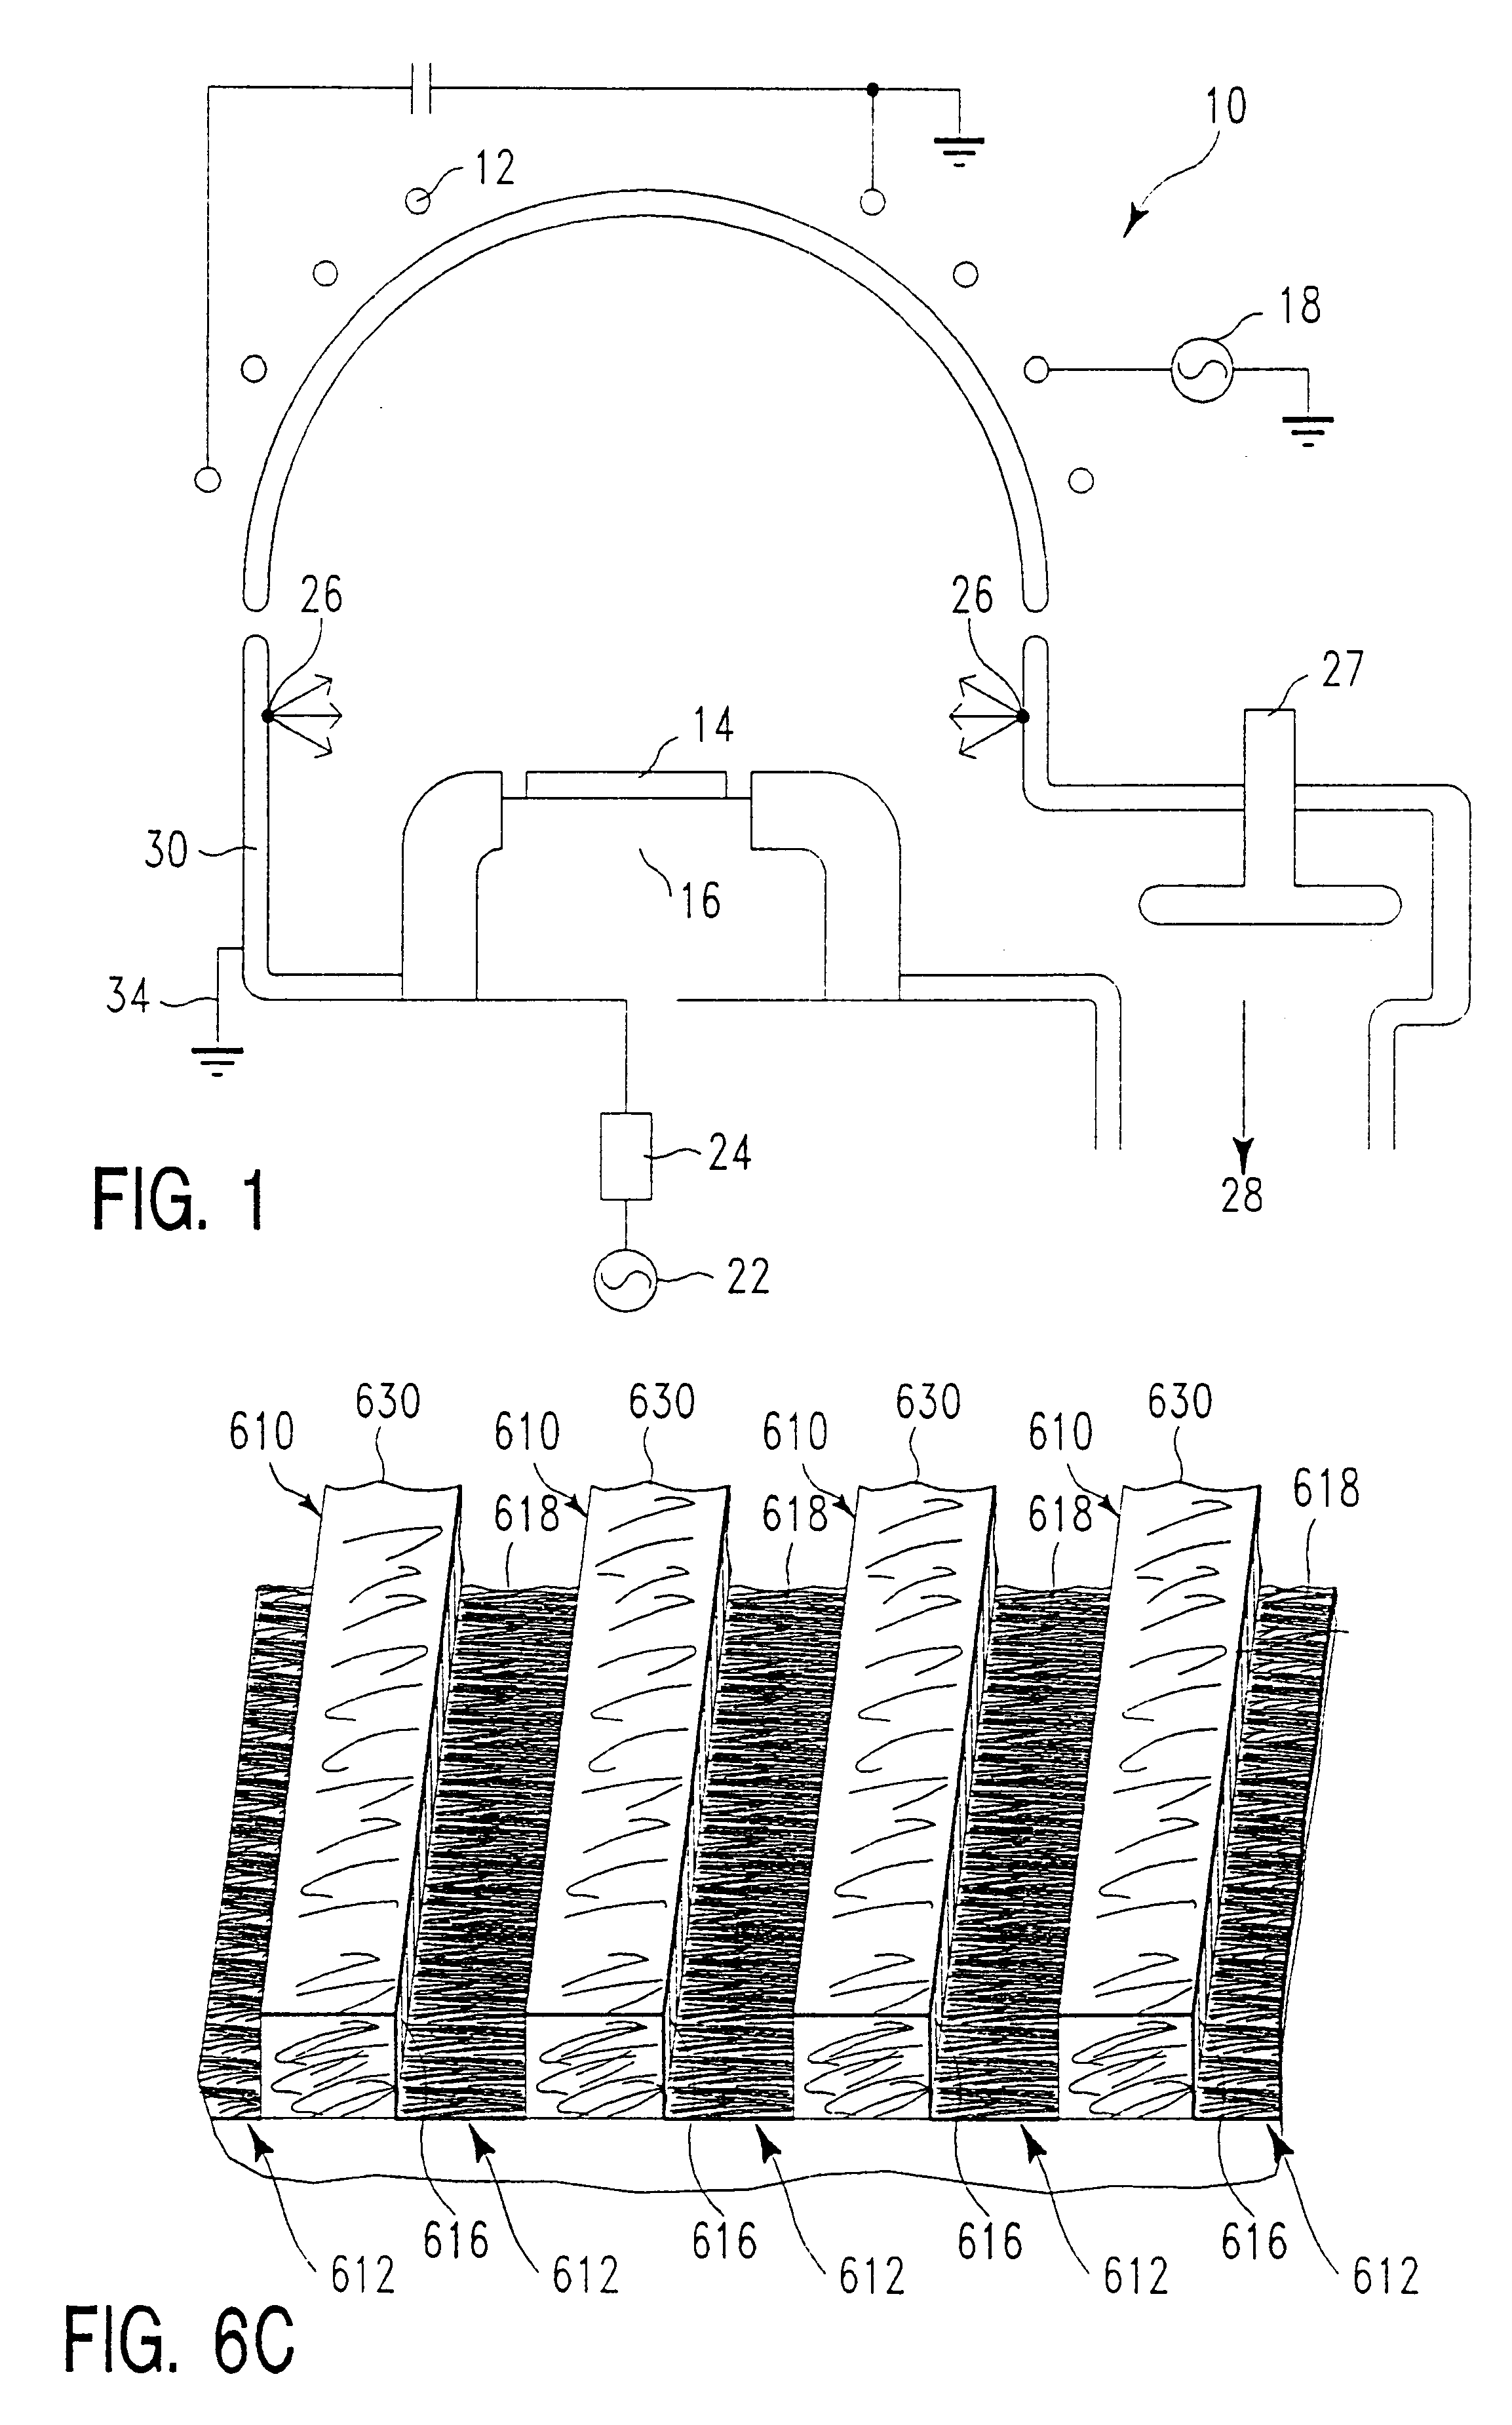 Method of heating a semiconductor substrate